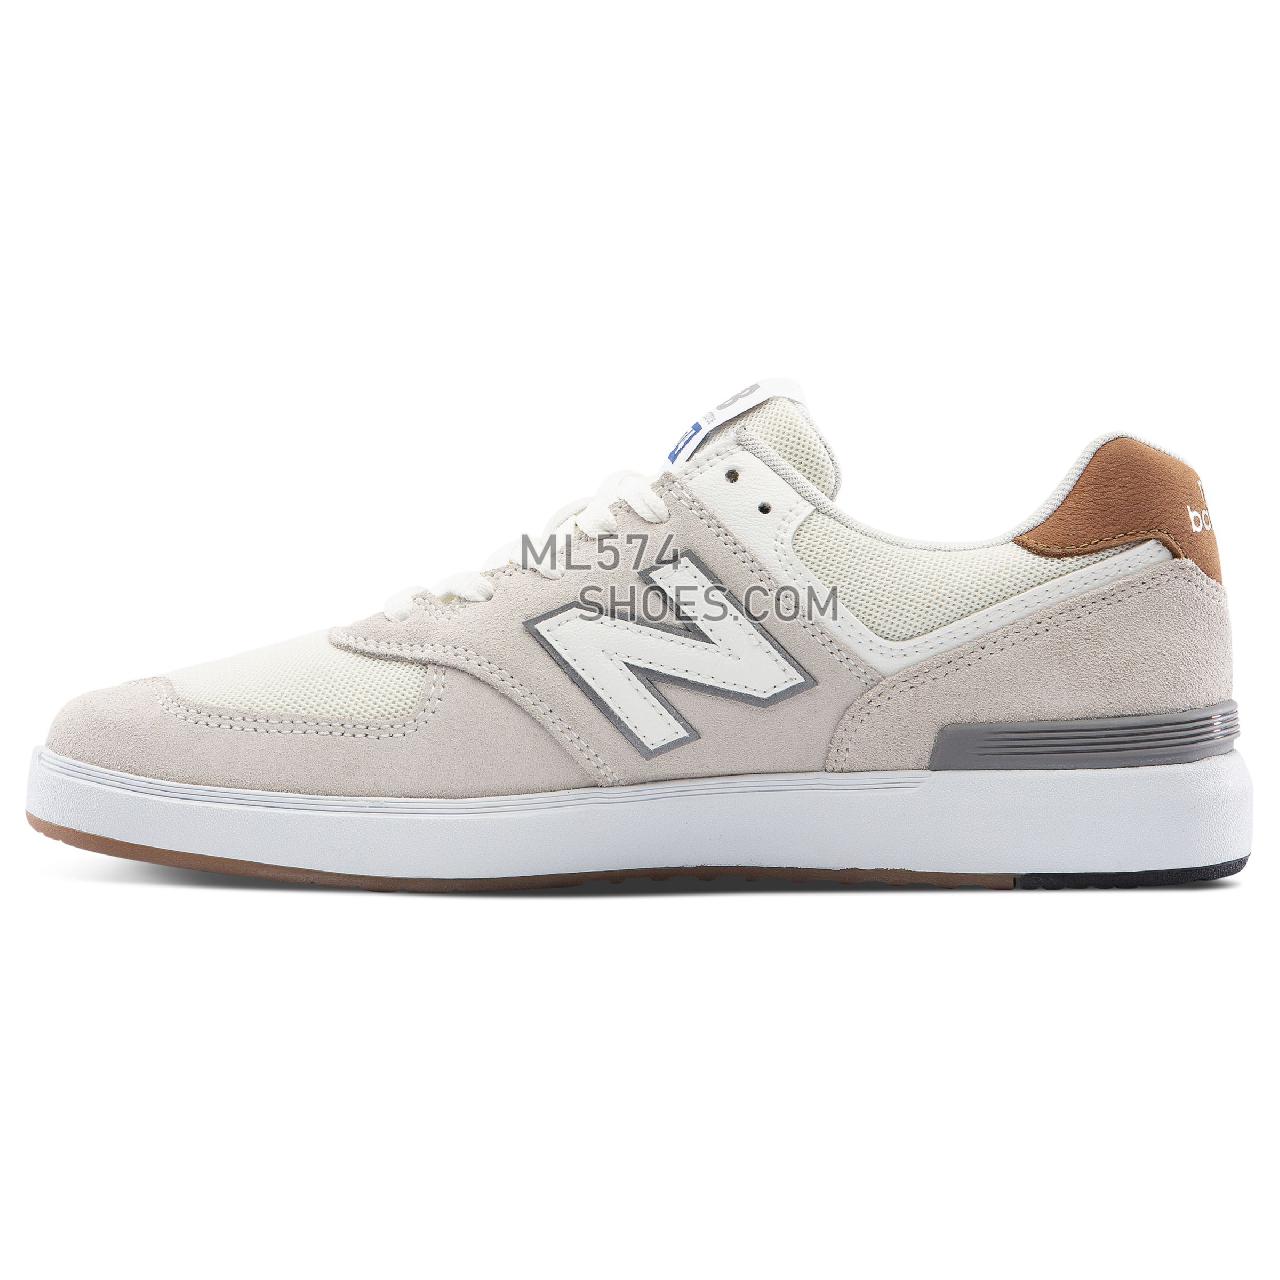 New Balance AM574 - Men's 574 - Classic White with Red - AM574WTR